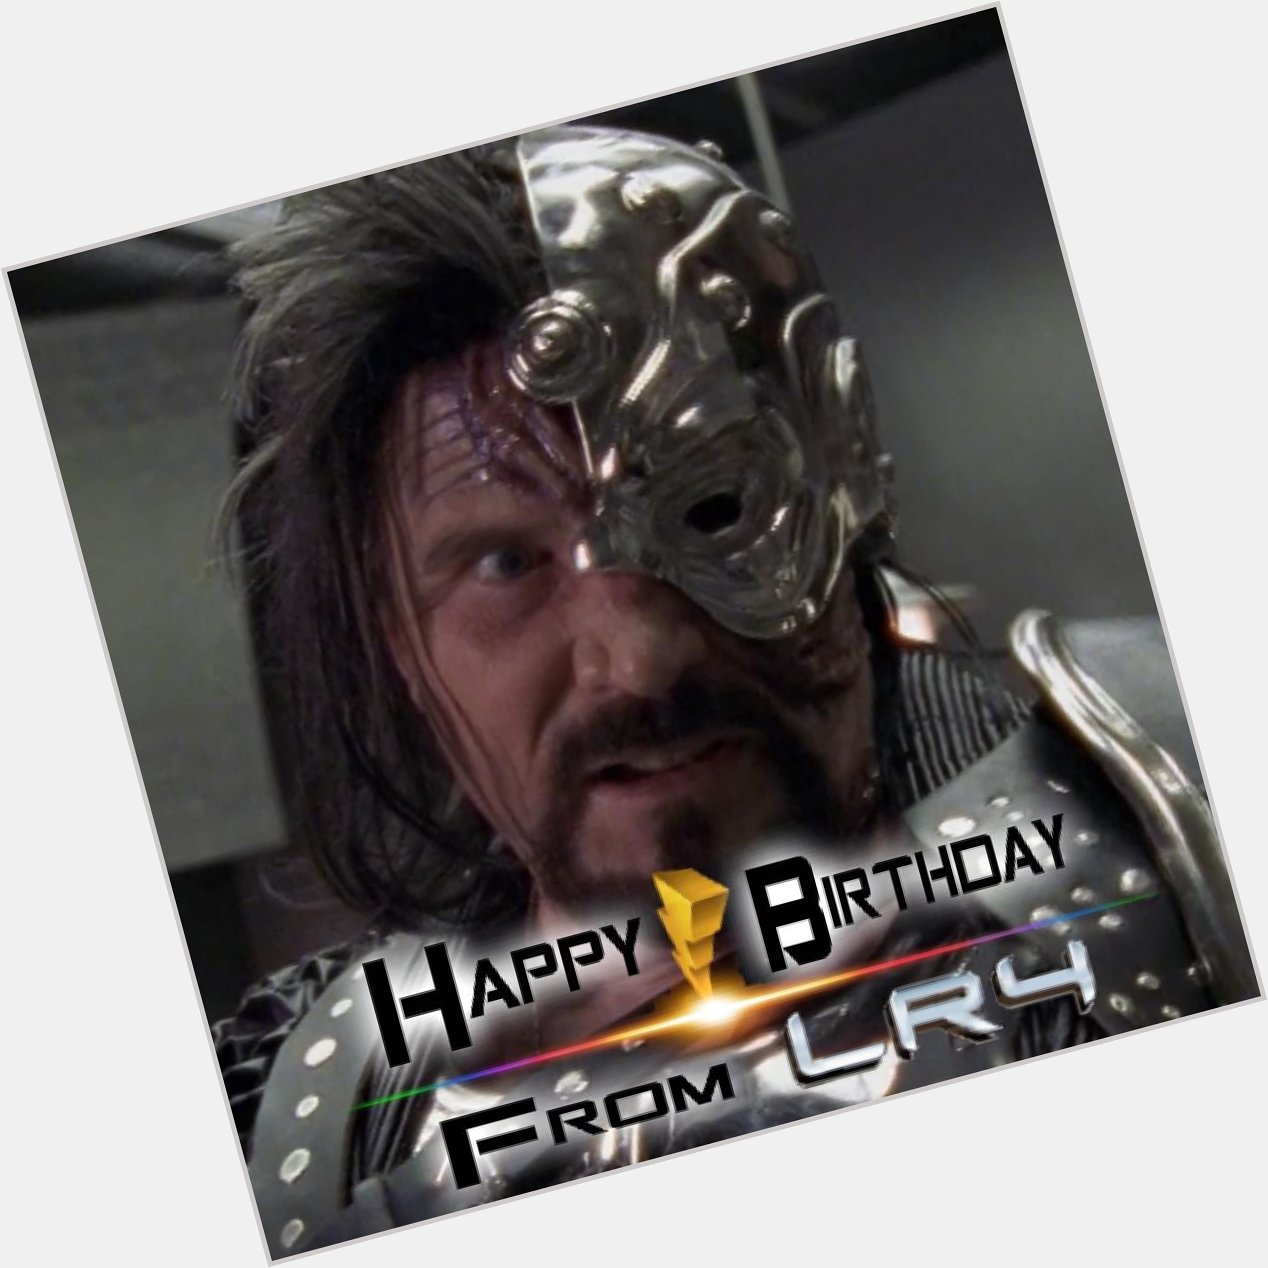 LR4 would also like to wish Vernon Wells a Happy Birthday! 